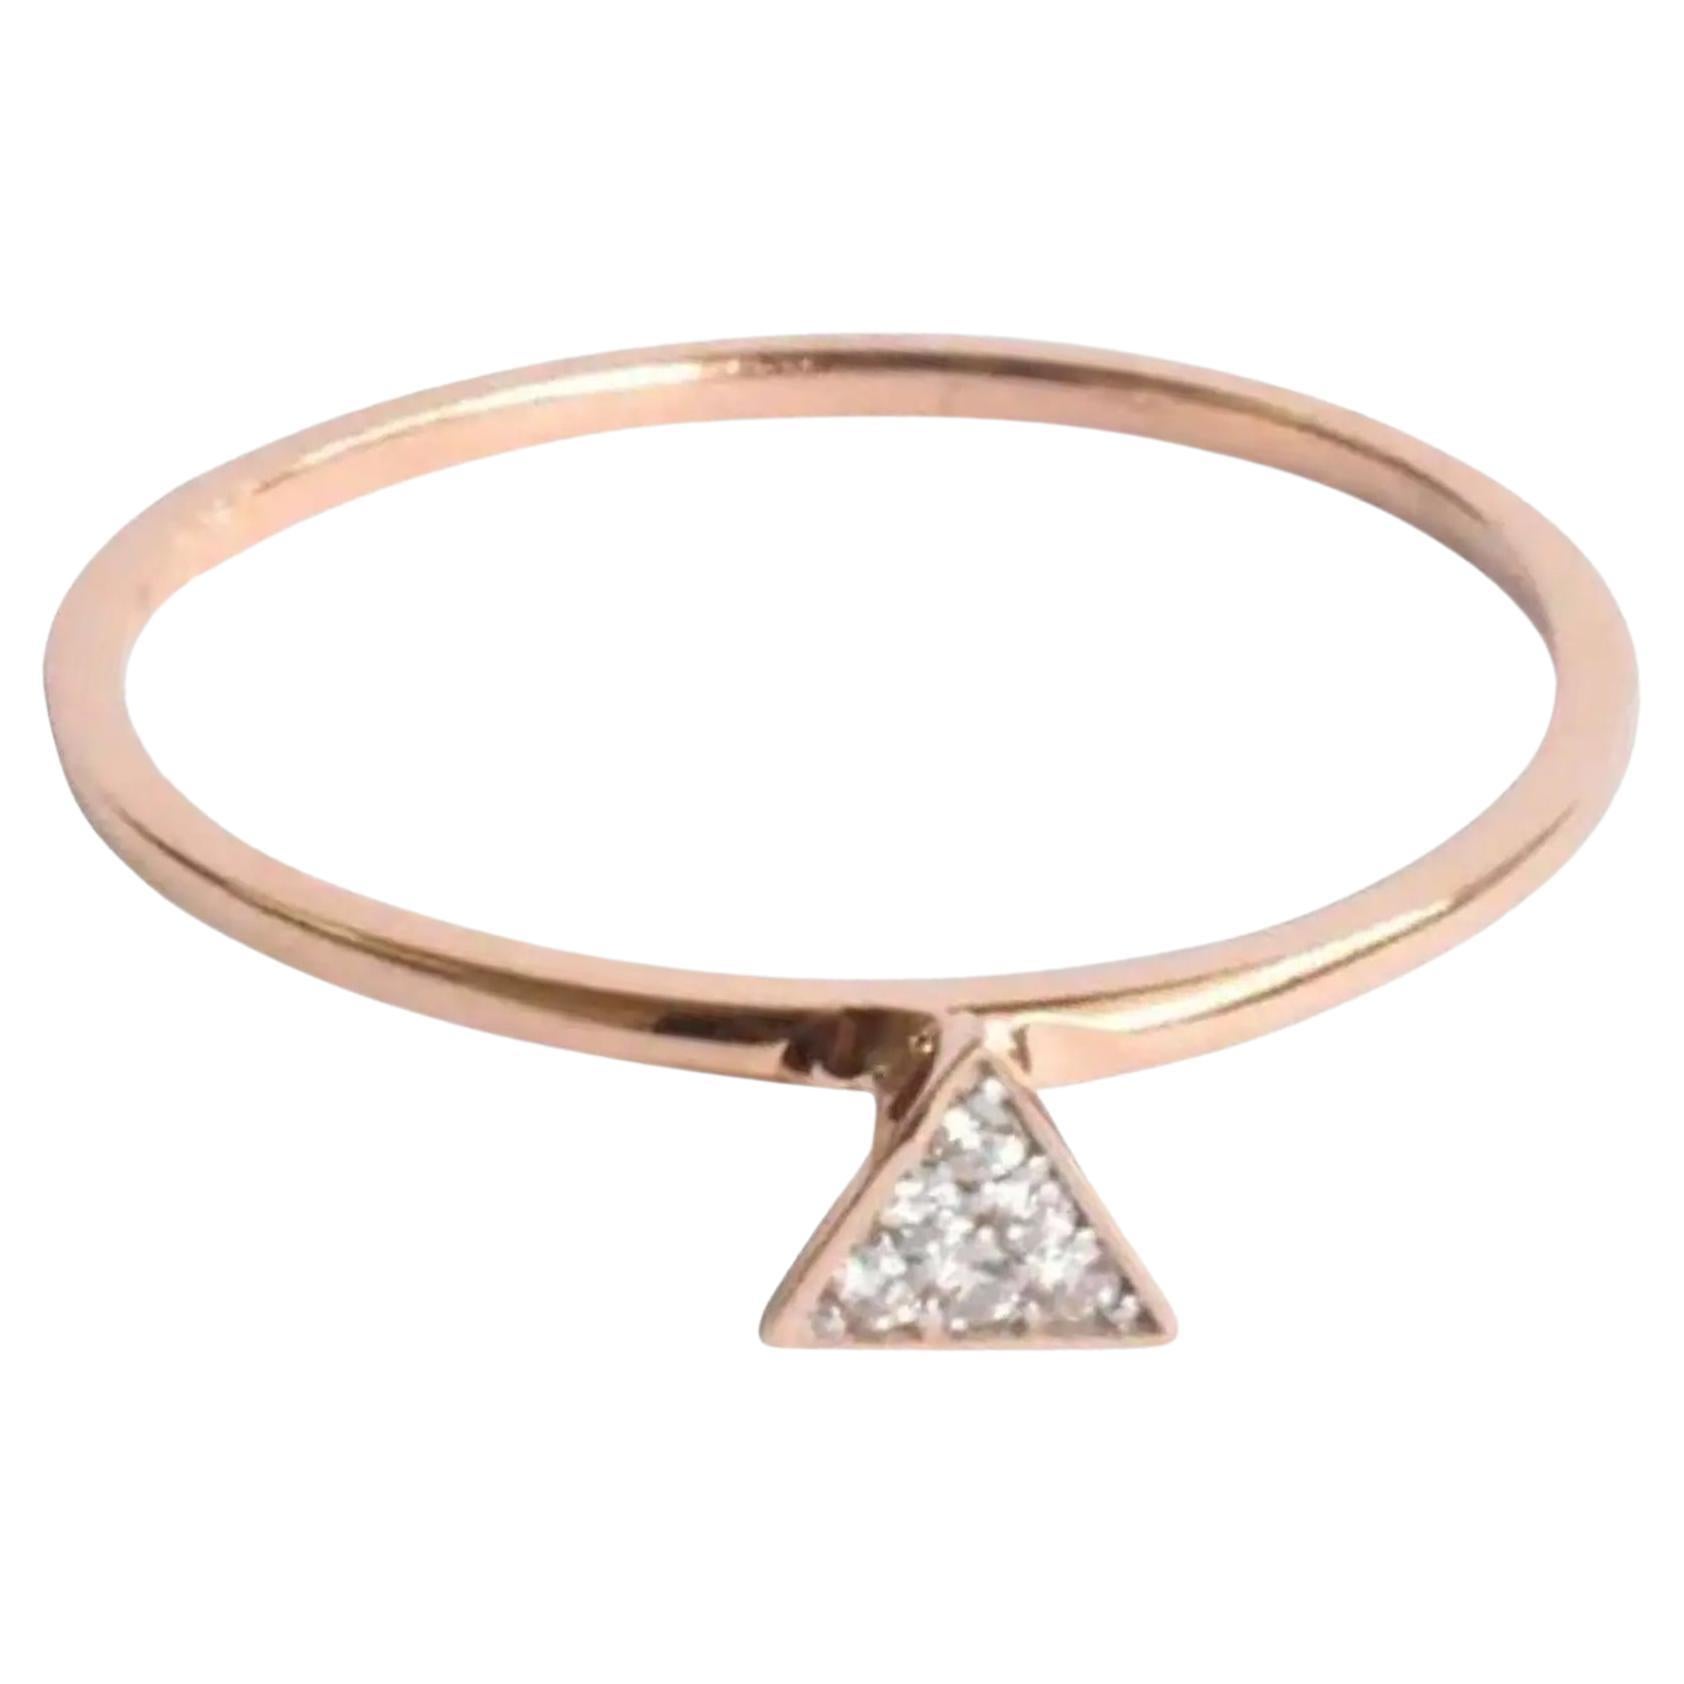 Customizable 14k Gold Triangle Stacking Ring with White Pave Diamonds ...